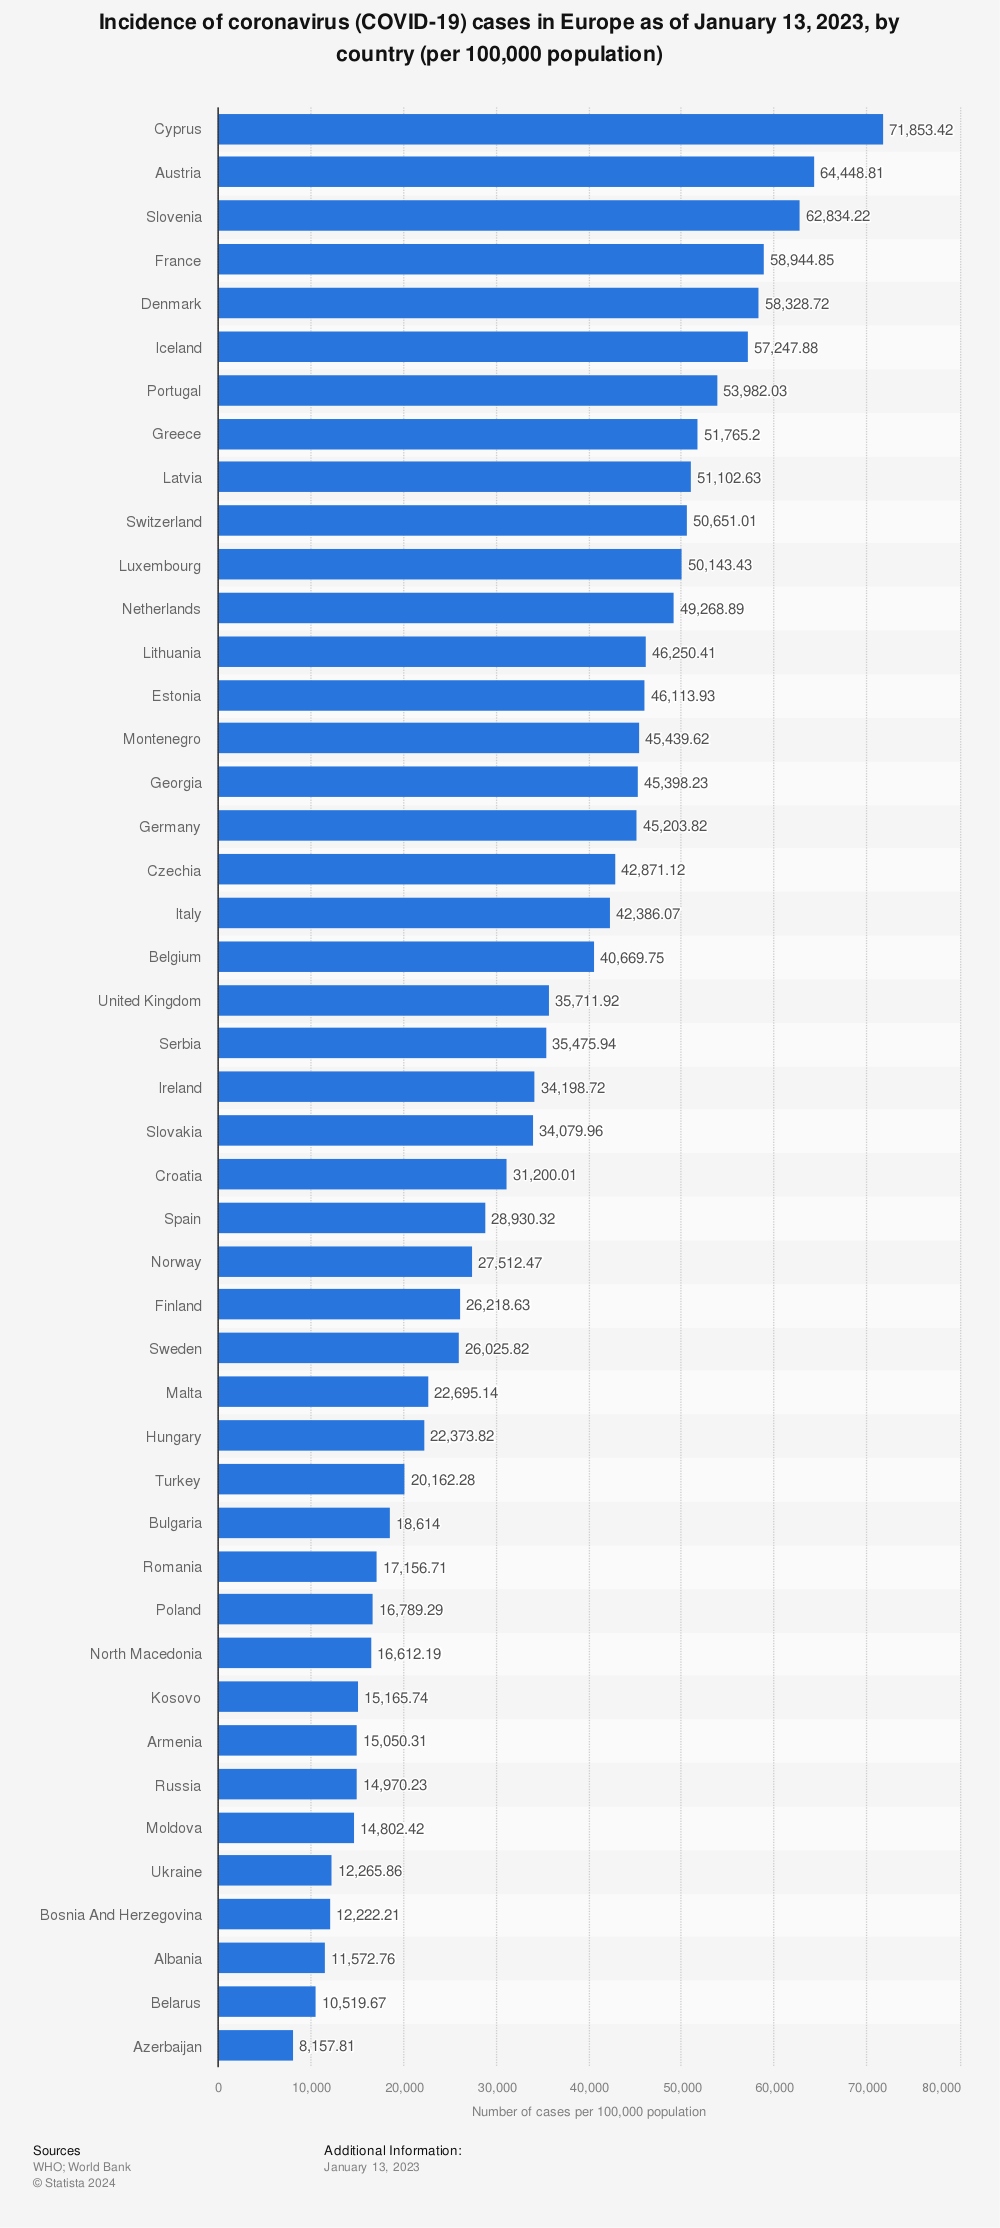 Statistic: Incidence of coronavirus (COVID-19) cases in Europe as of January 13, 2023, by country (per 100,000 population) | Statista